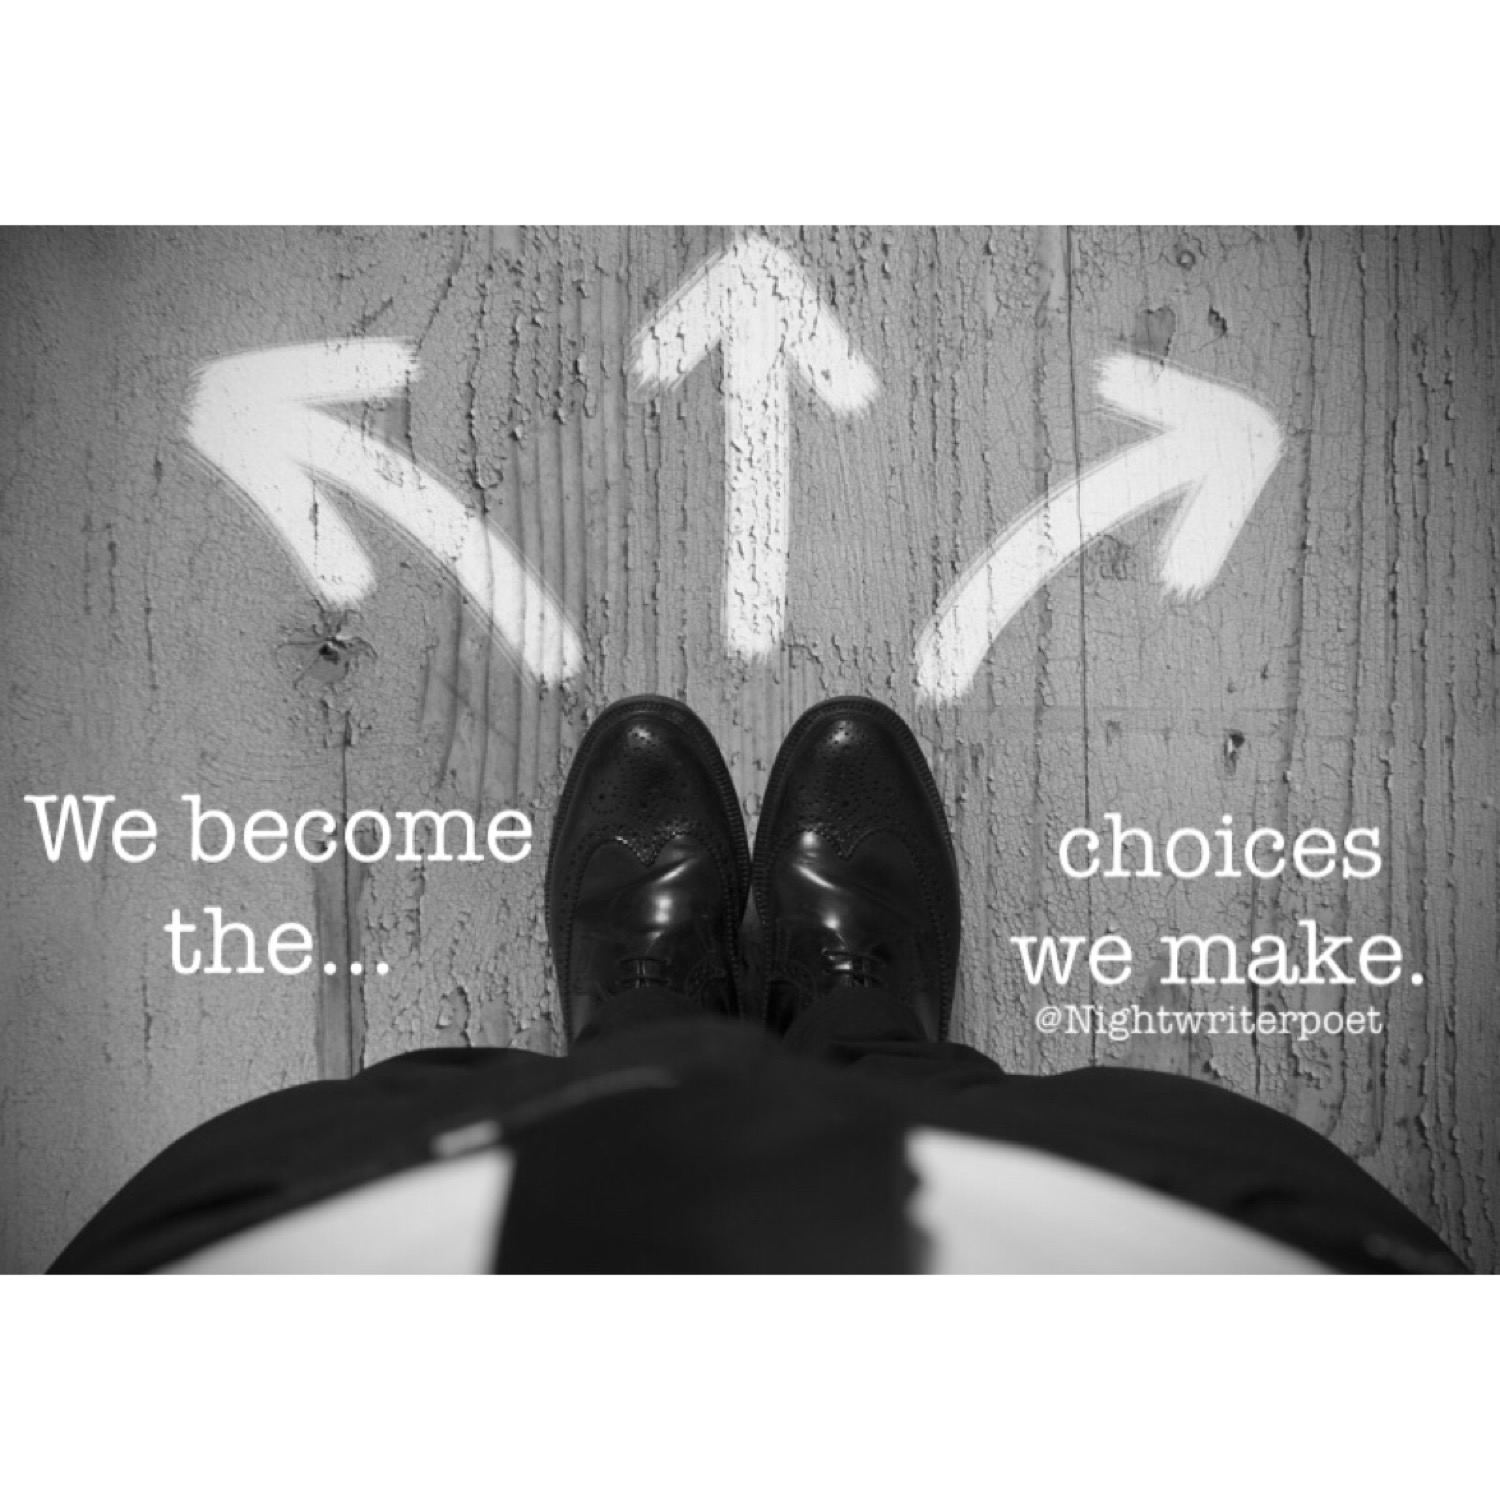 The Choices We Make